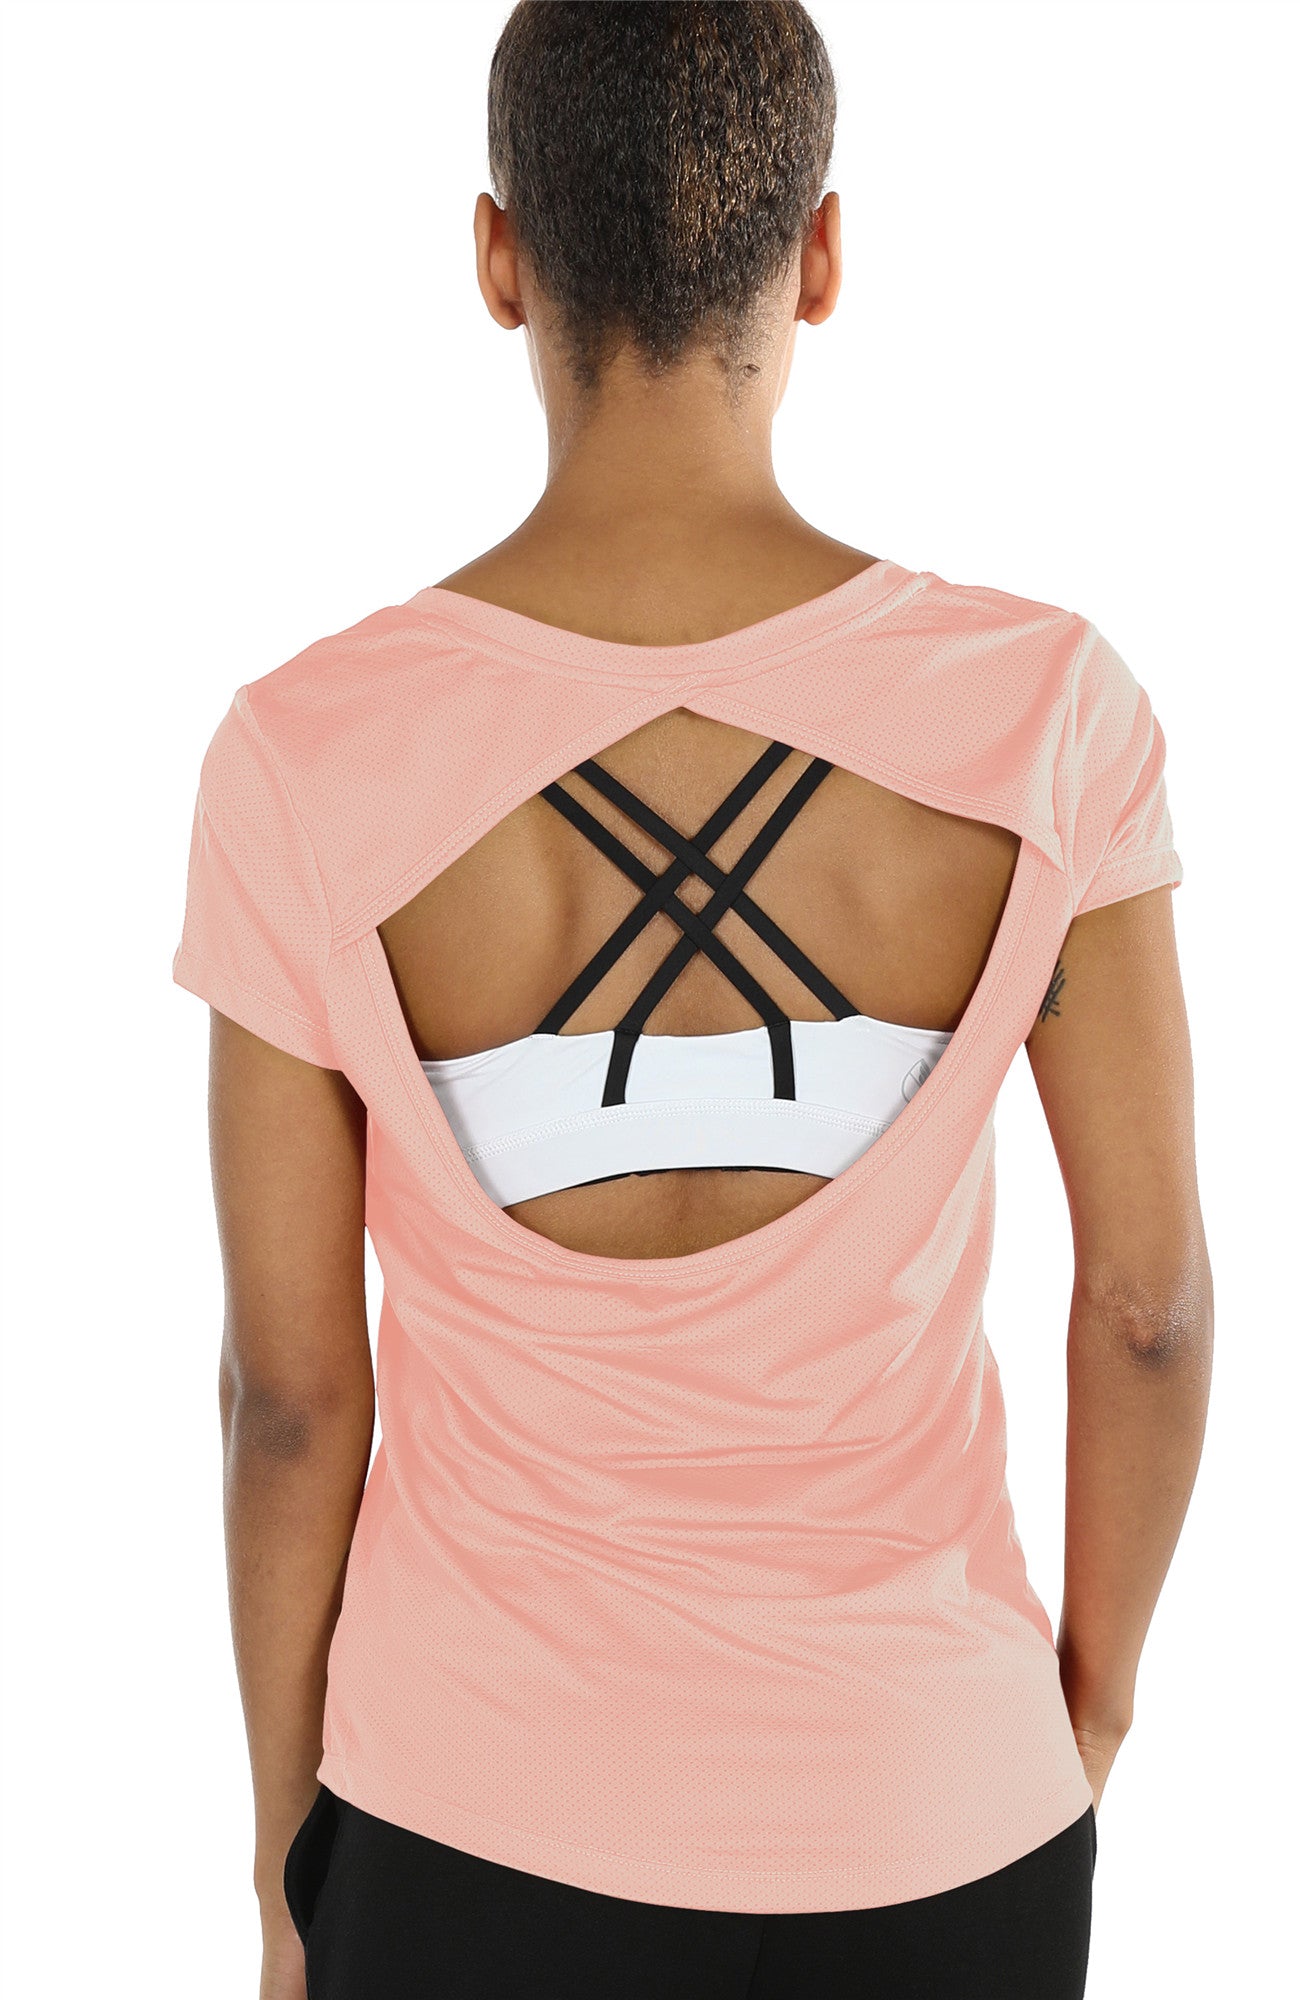 Open Back Woman’s Jersey T-shirt For Fitness Gym And Yoga - I’m Loving Yoga